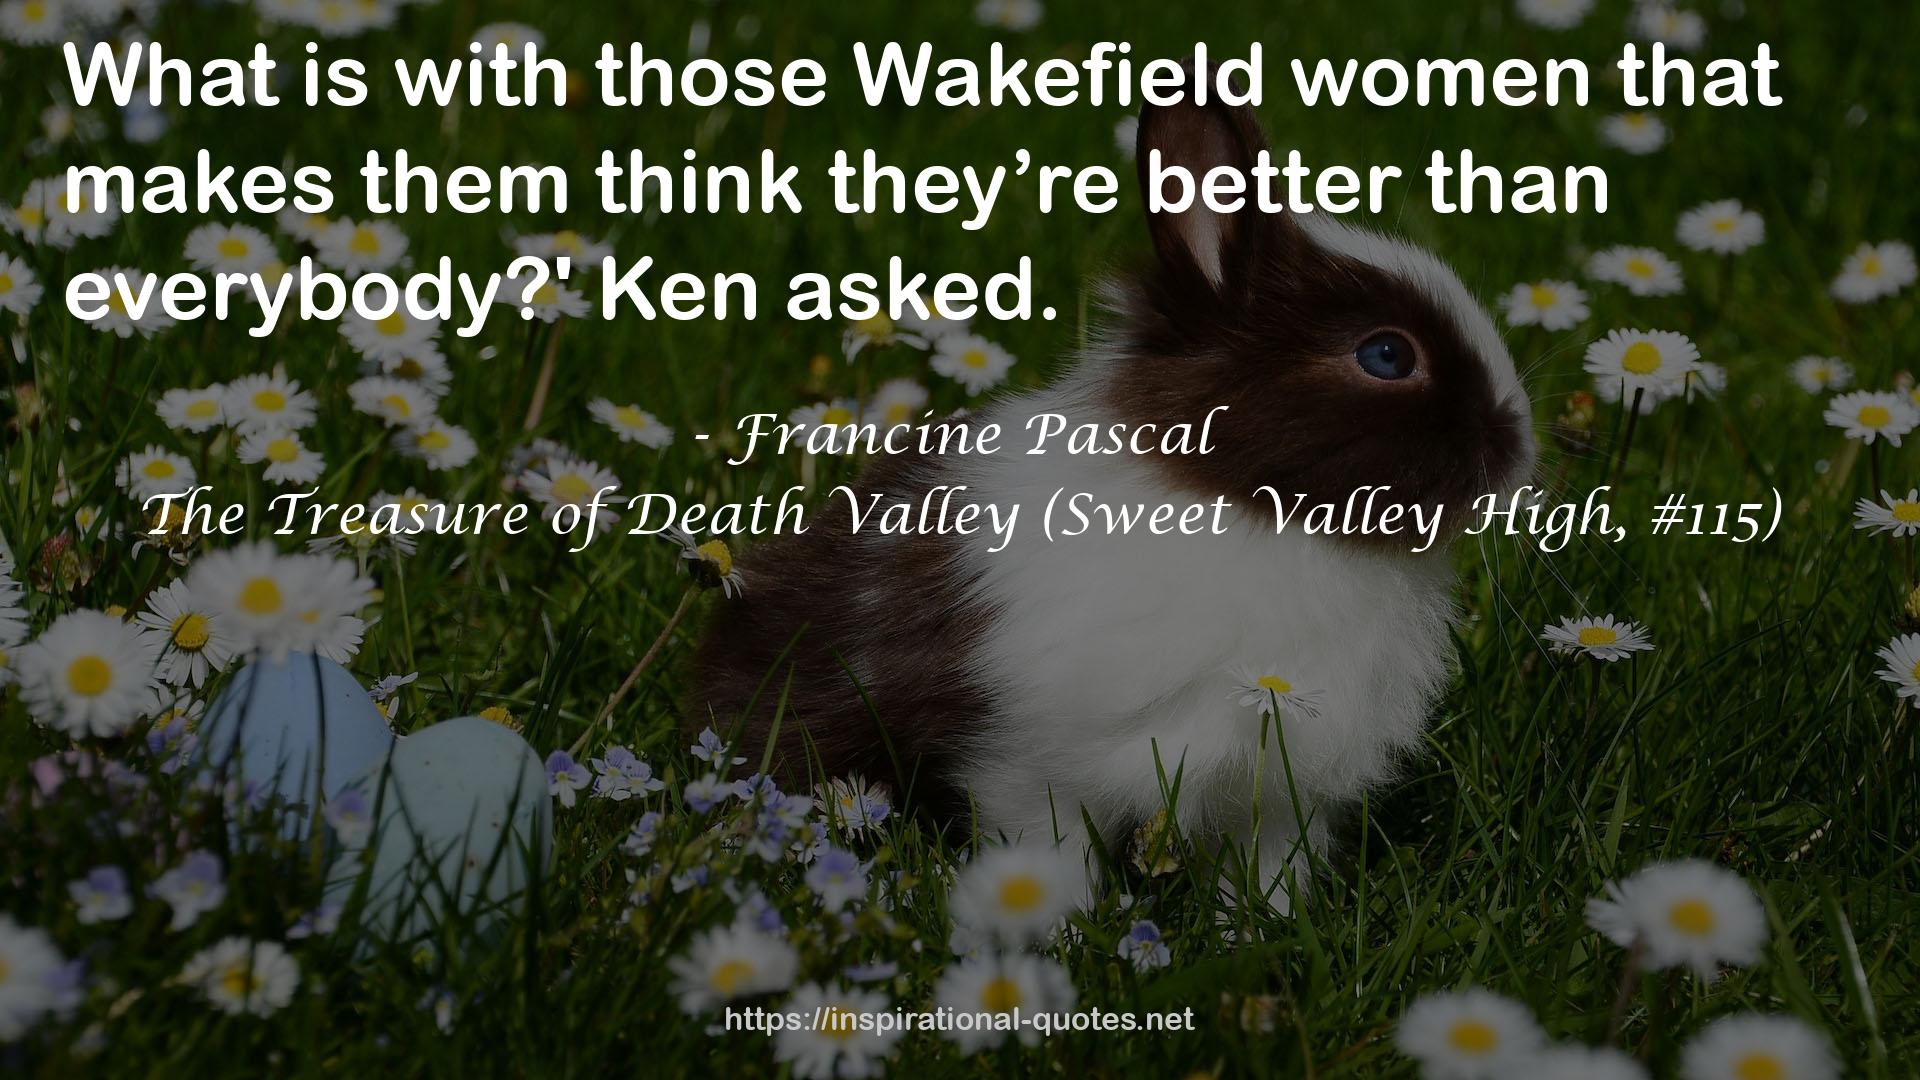 The Treasure of Death Valley (Sweet Valley High, #115) QUOTES